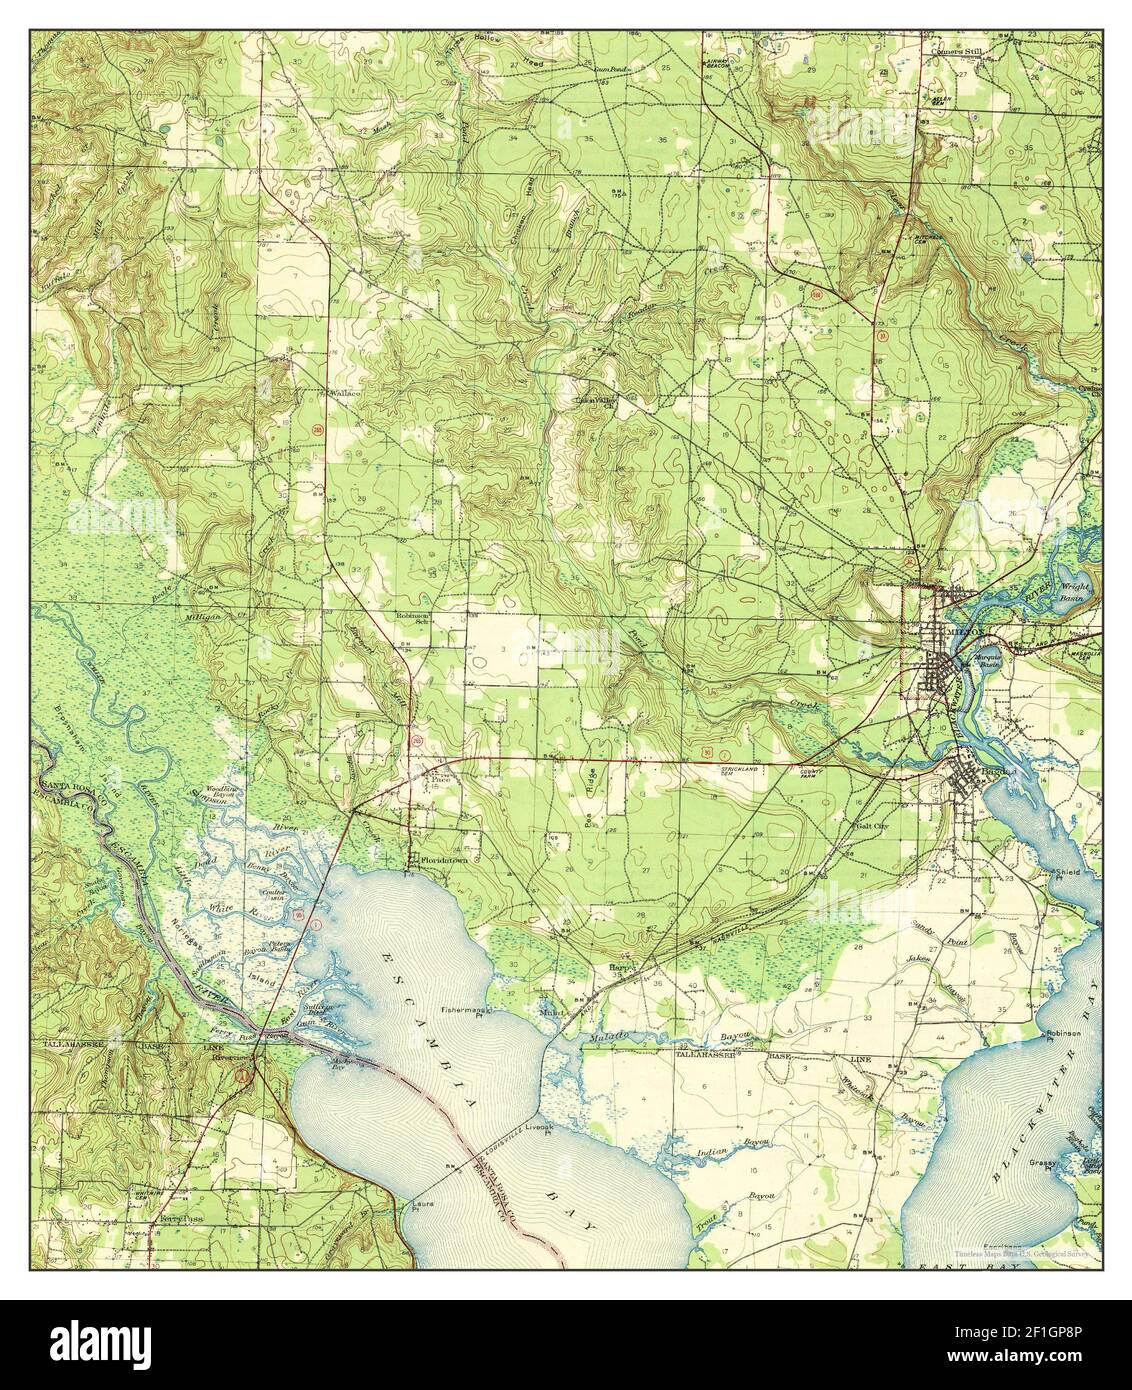 Milton Florida Map 1943 162500 United States Of America By Timeless Maps Data Us Geological Survey 2F1GP8P 